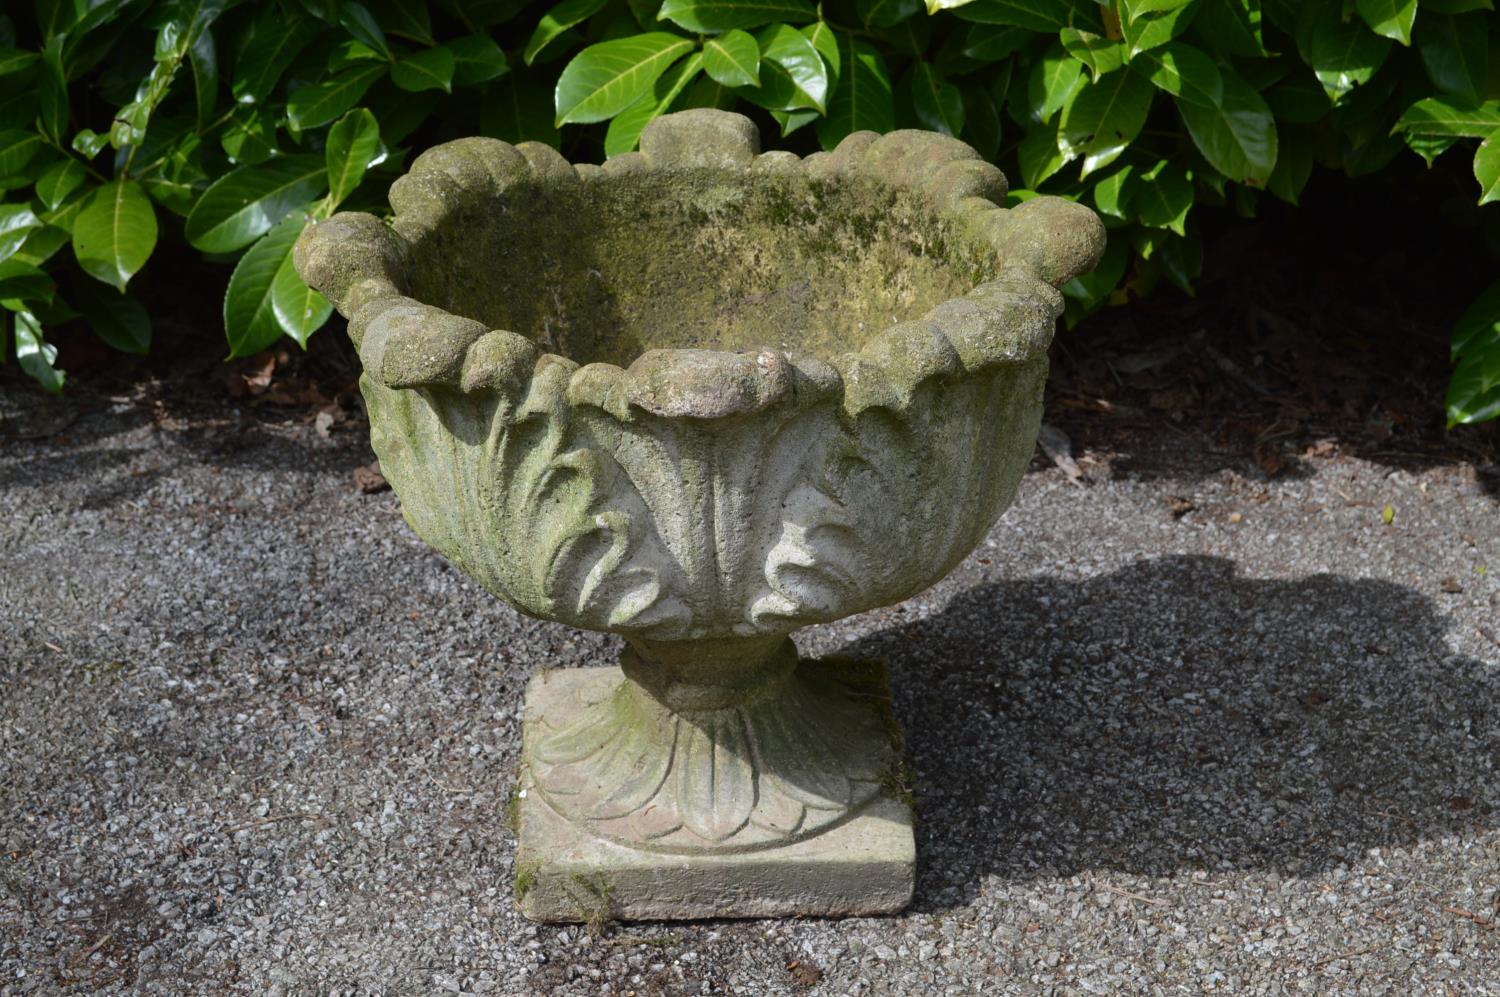 Single leaf formed garden urn - 49cm dia x 42cm tall Please note descriptions are not condition